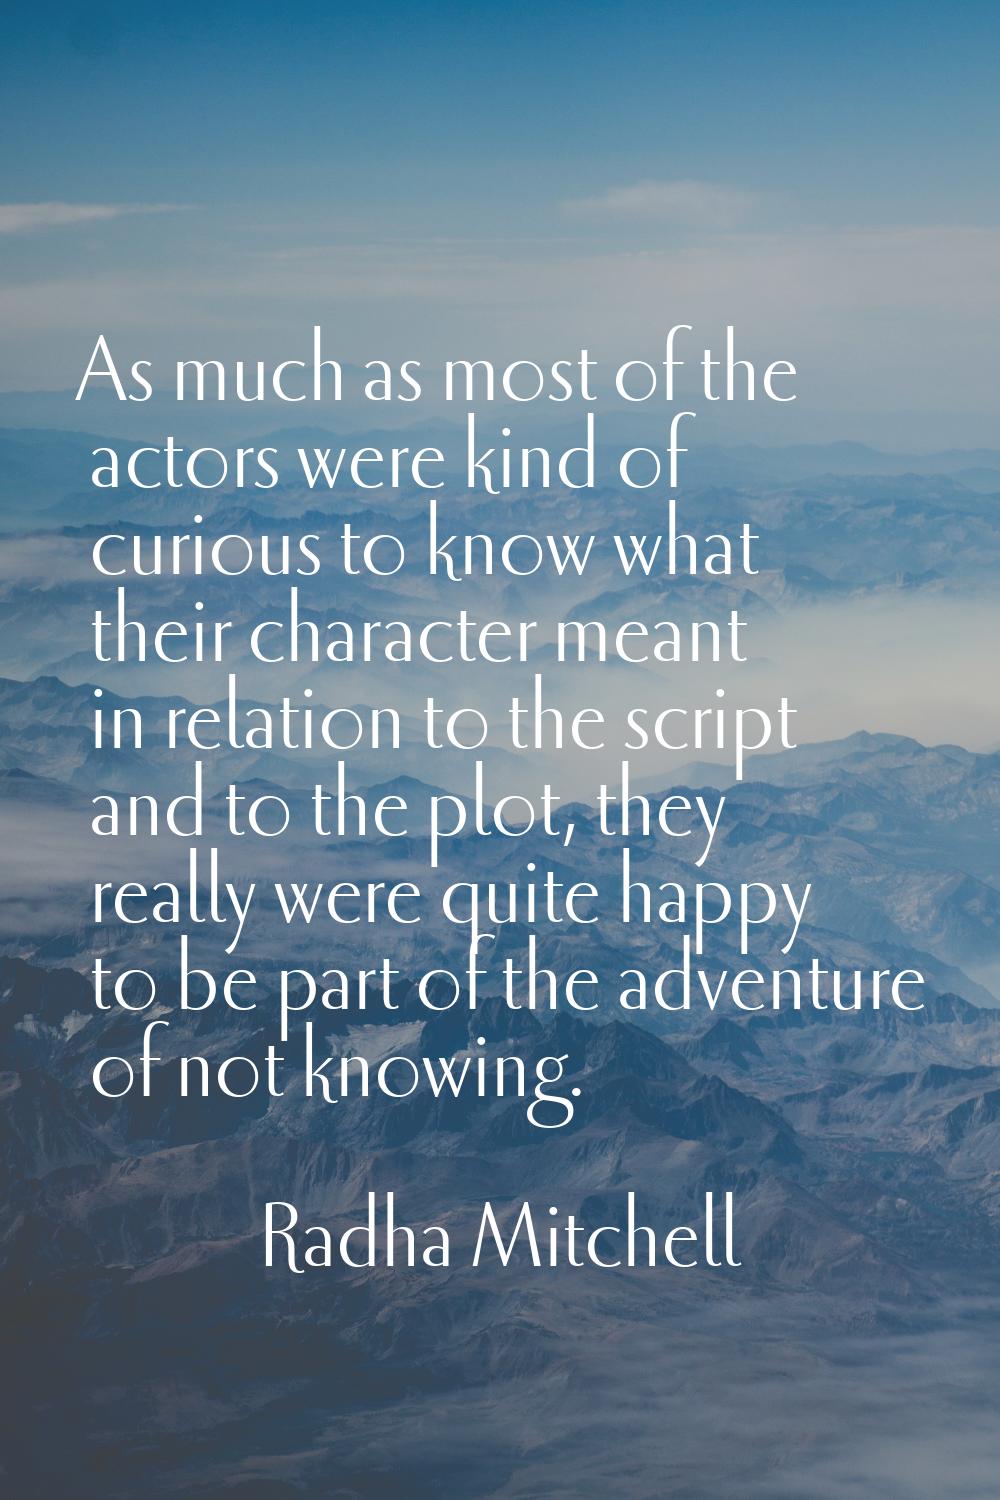 As much as most of the actors were kind of curious to know what their character meant in relation t